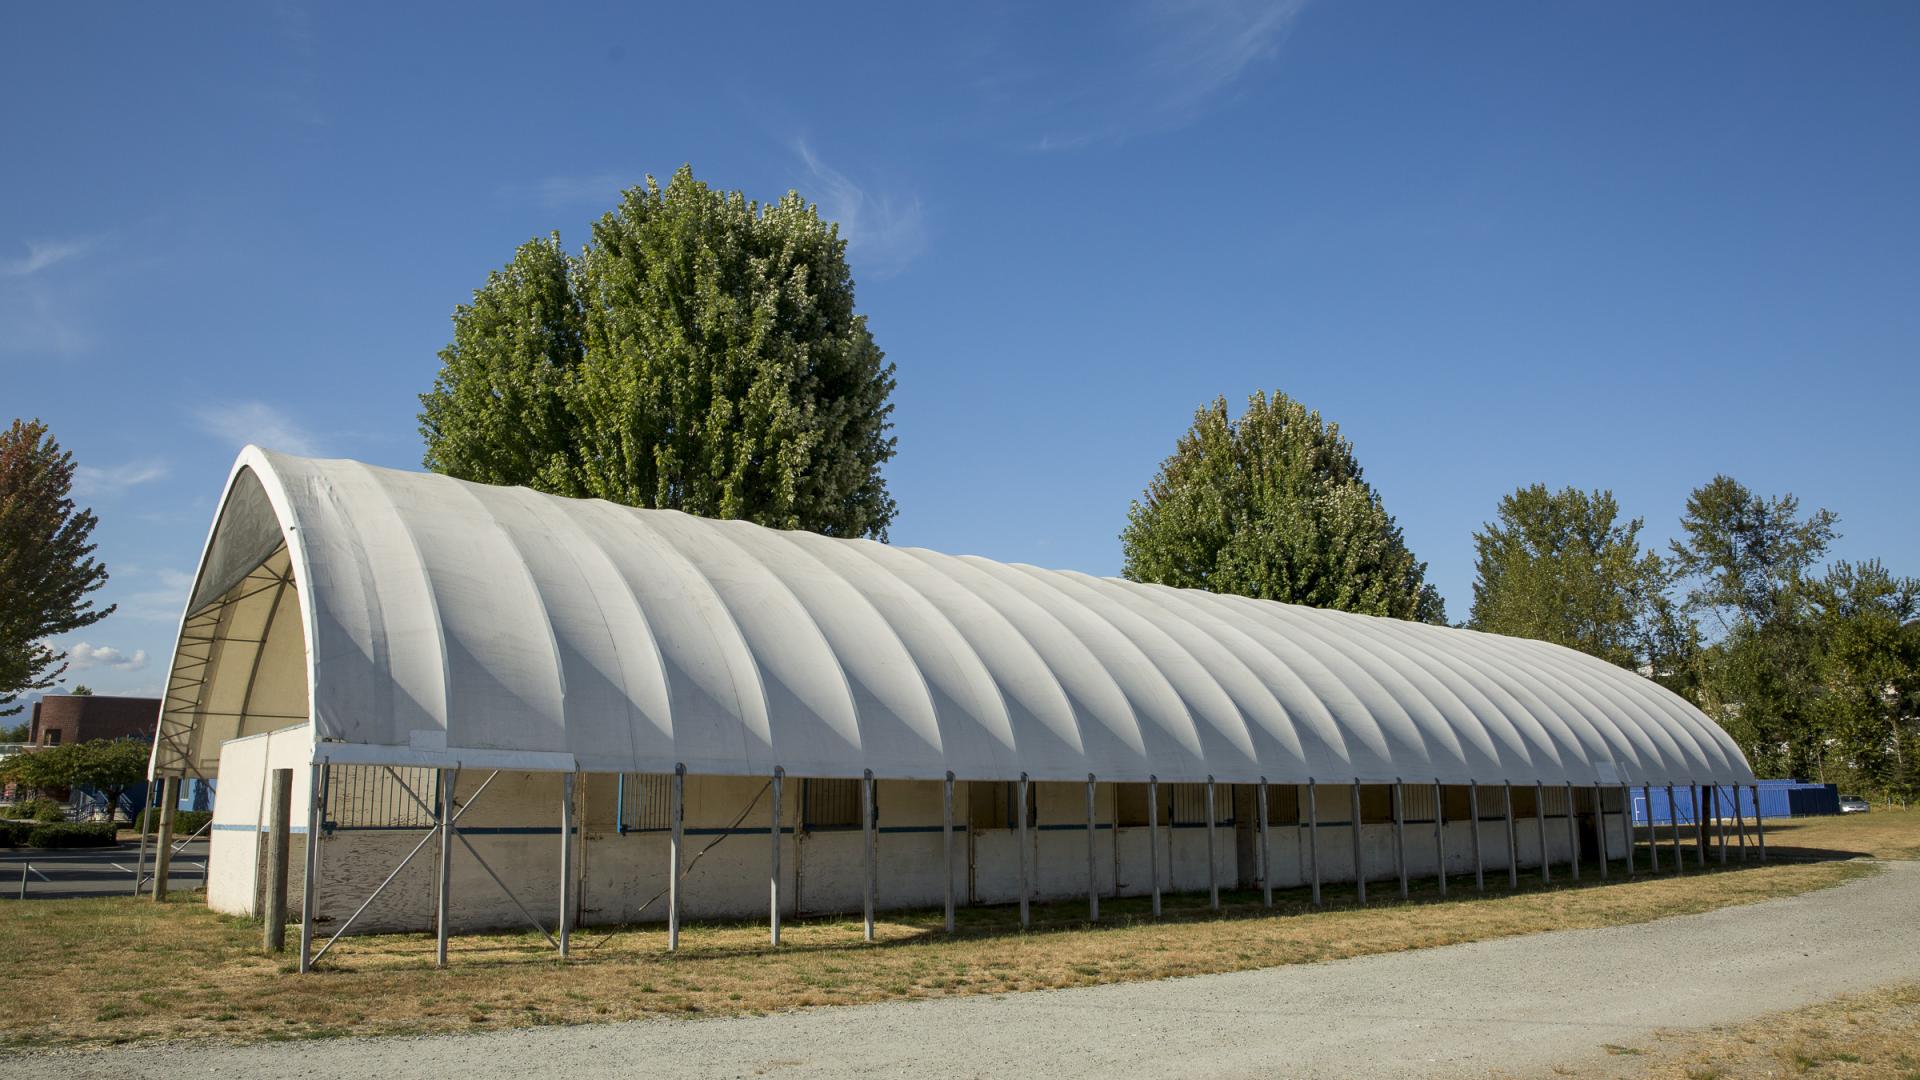 A cloth-covered open-air shelter sits on the Albion Fairgrounds, concealing horse stalls within.